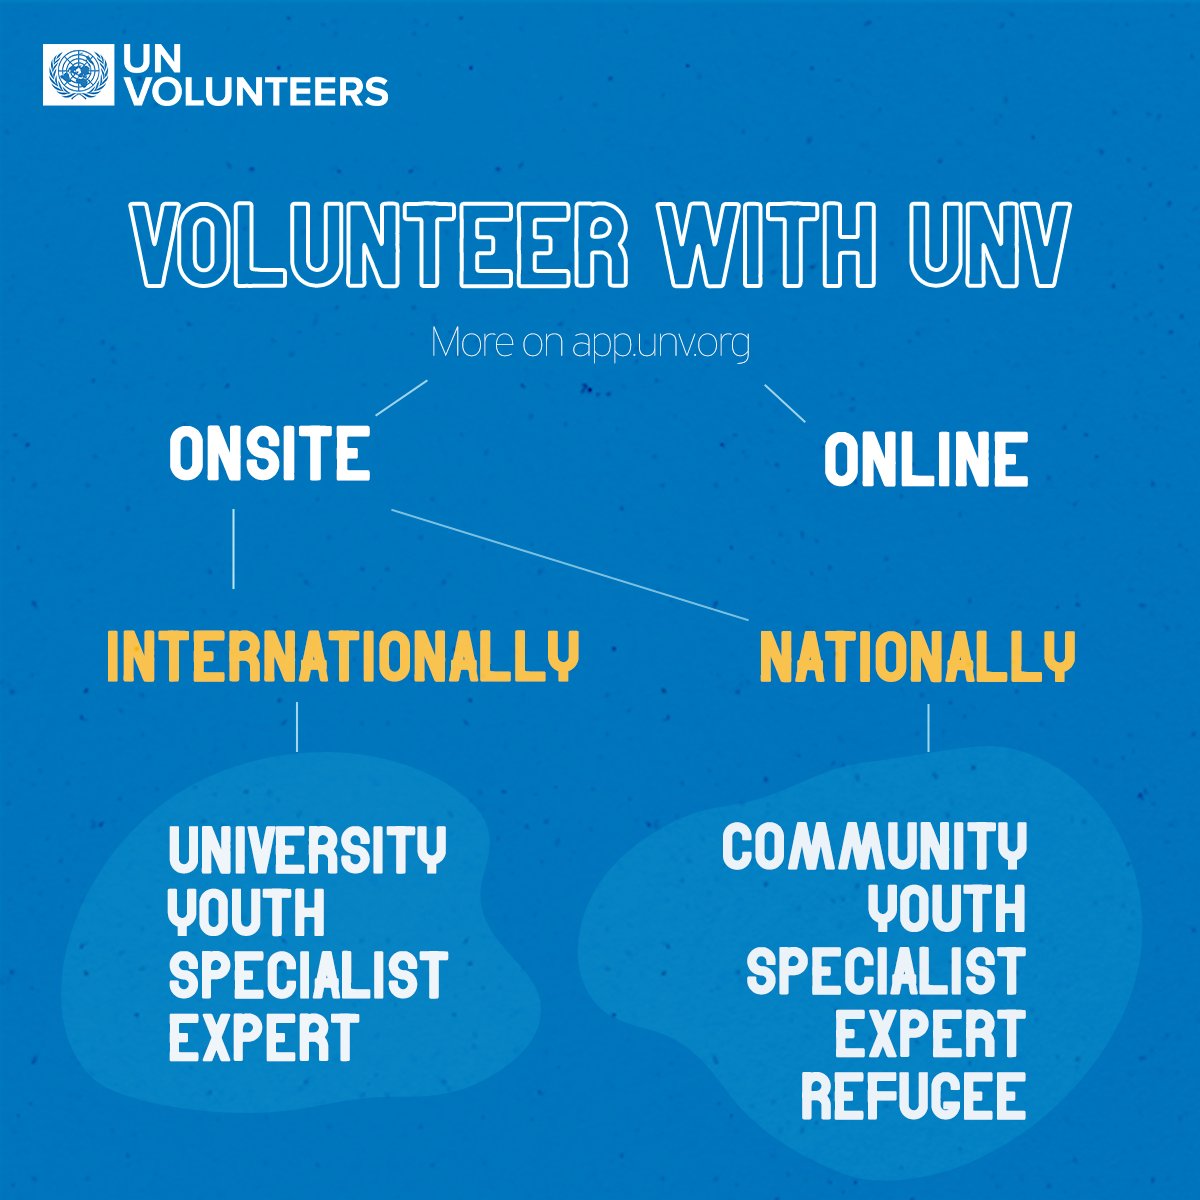 At a time of immense need, there are many ways to make a difference in the world as a UN Volunteer. Explore more at 🔗 app.unv.org